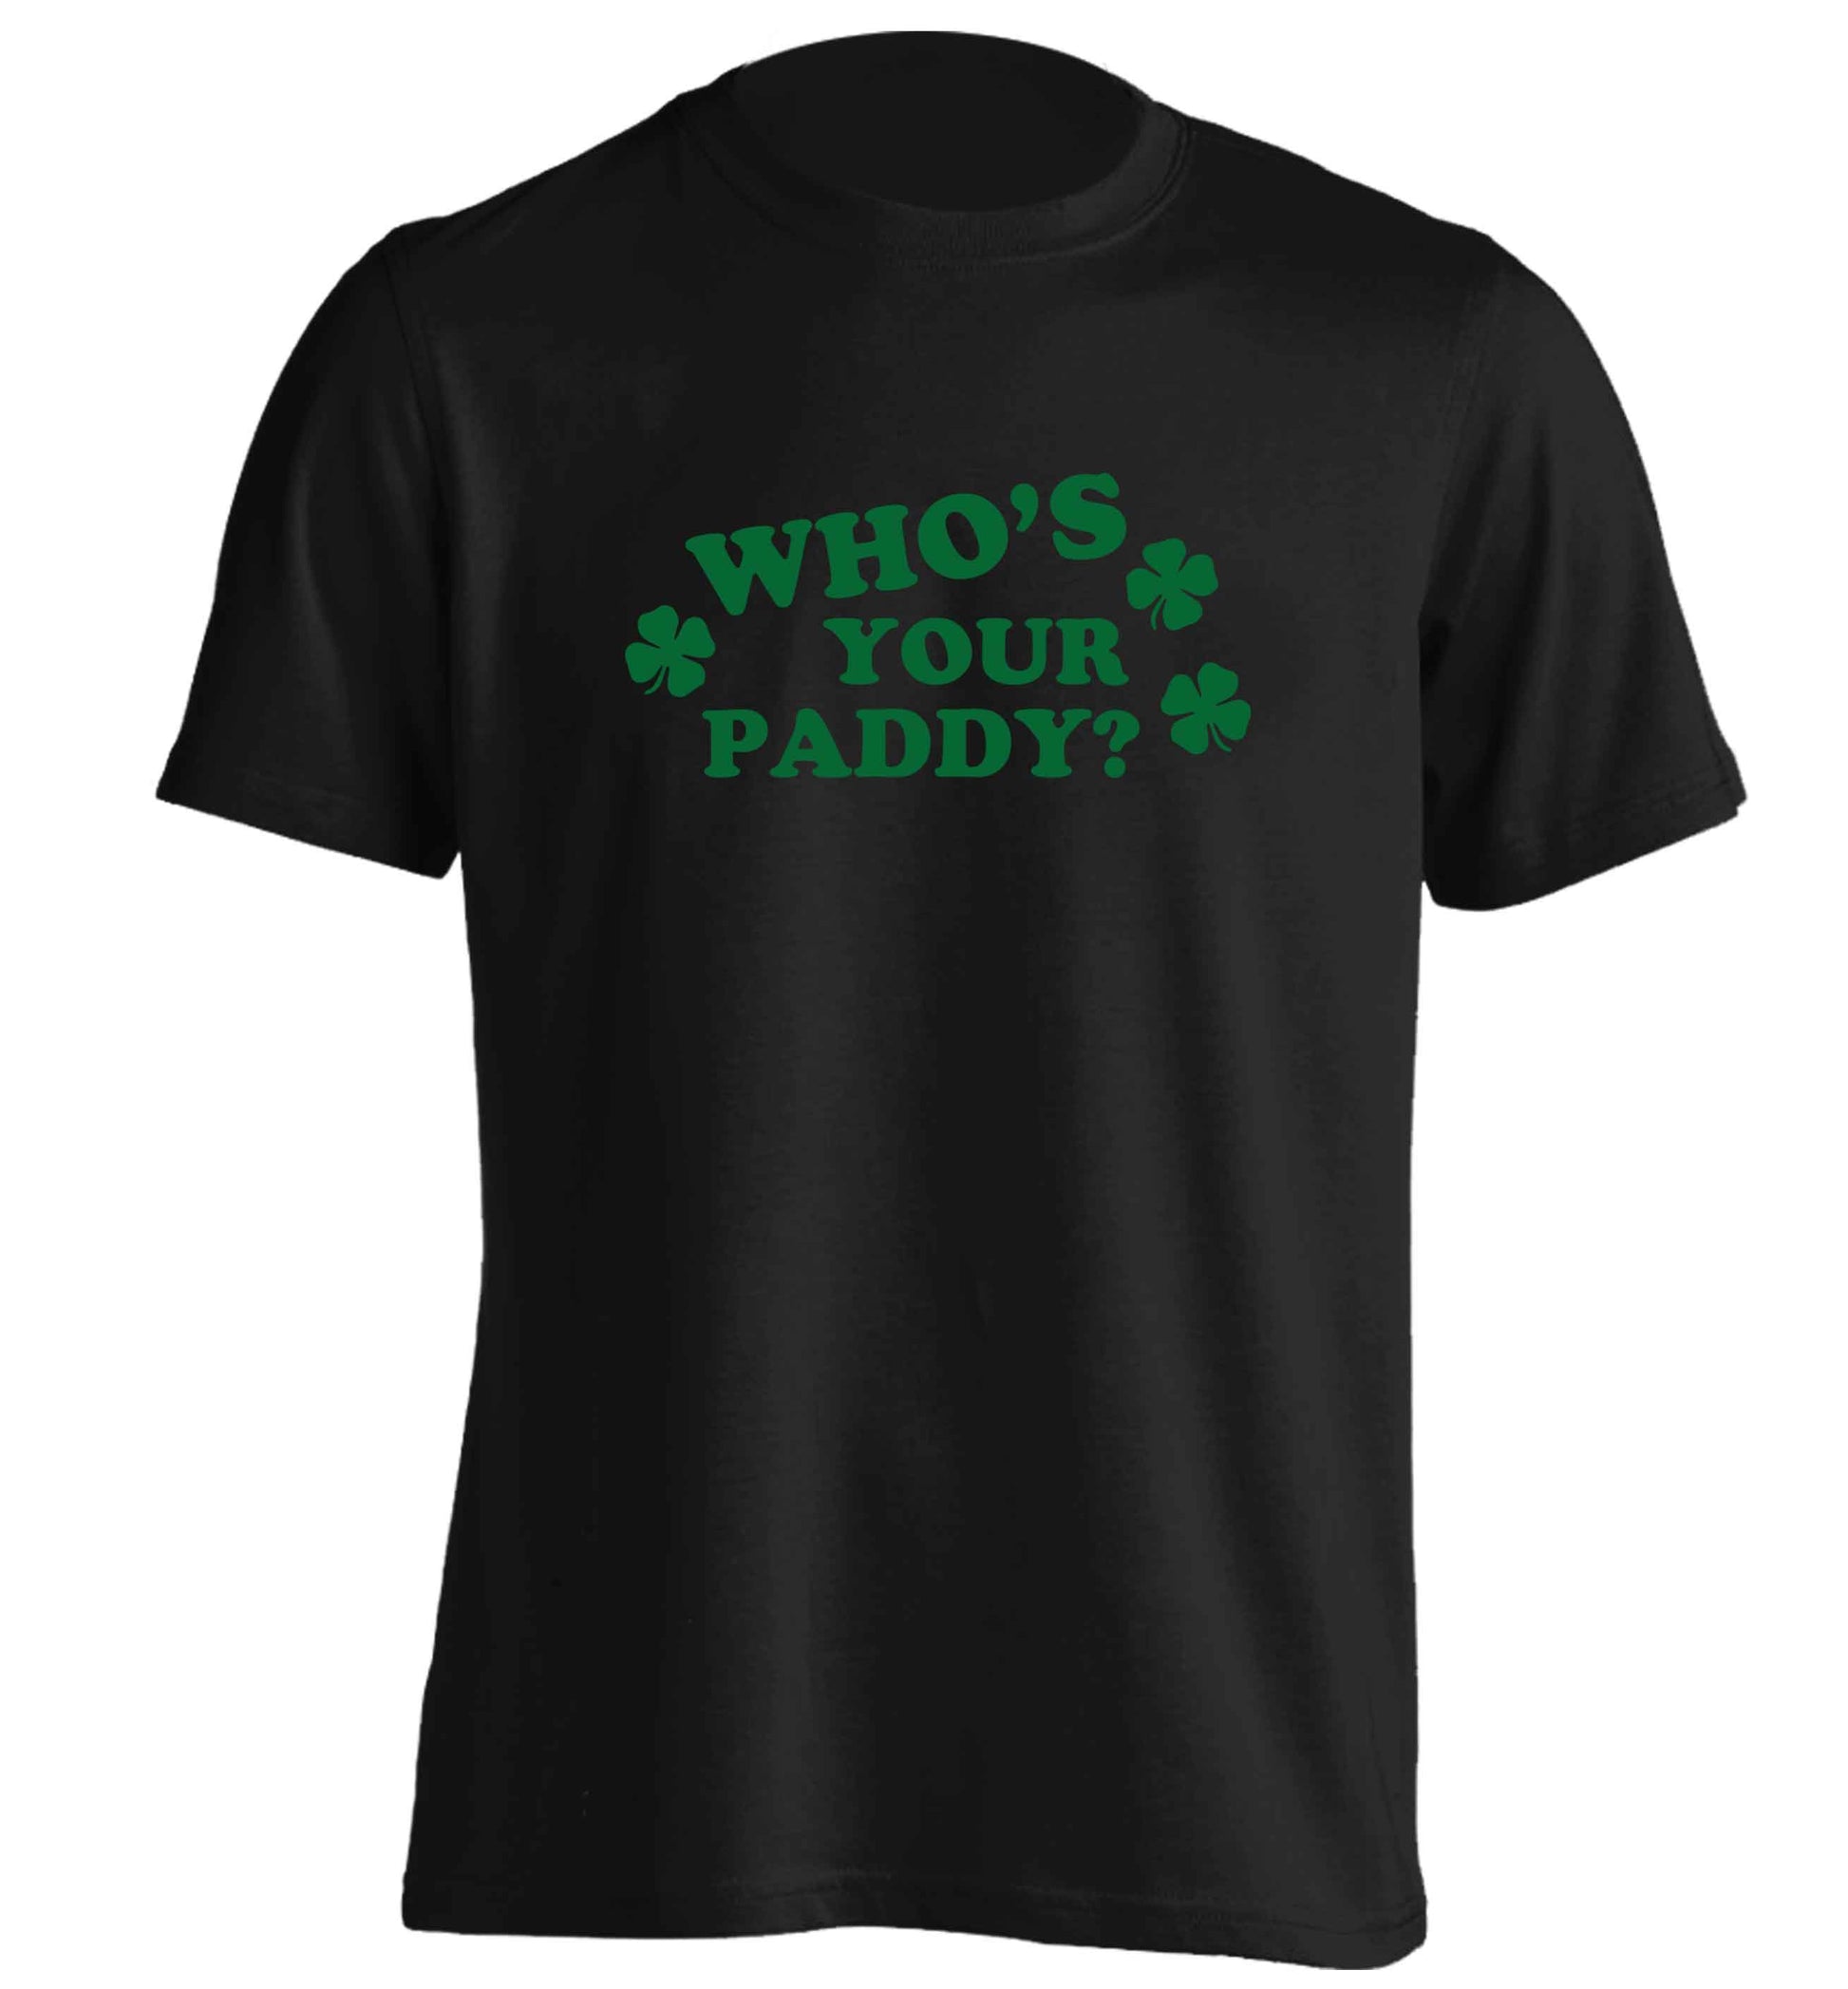 Who's your paddy? adults unisex black Tshirt 2XL